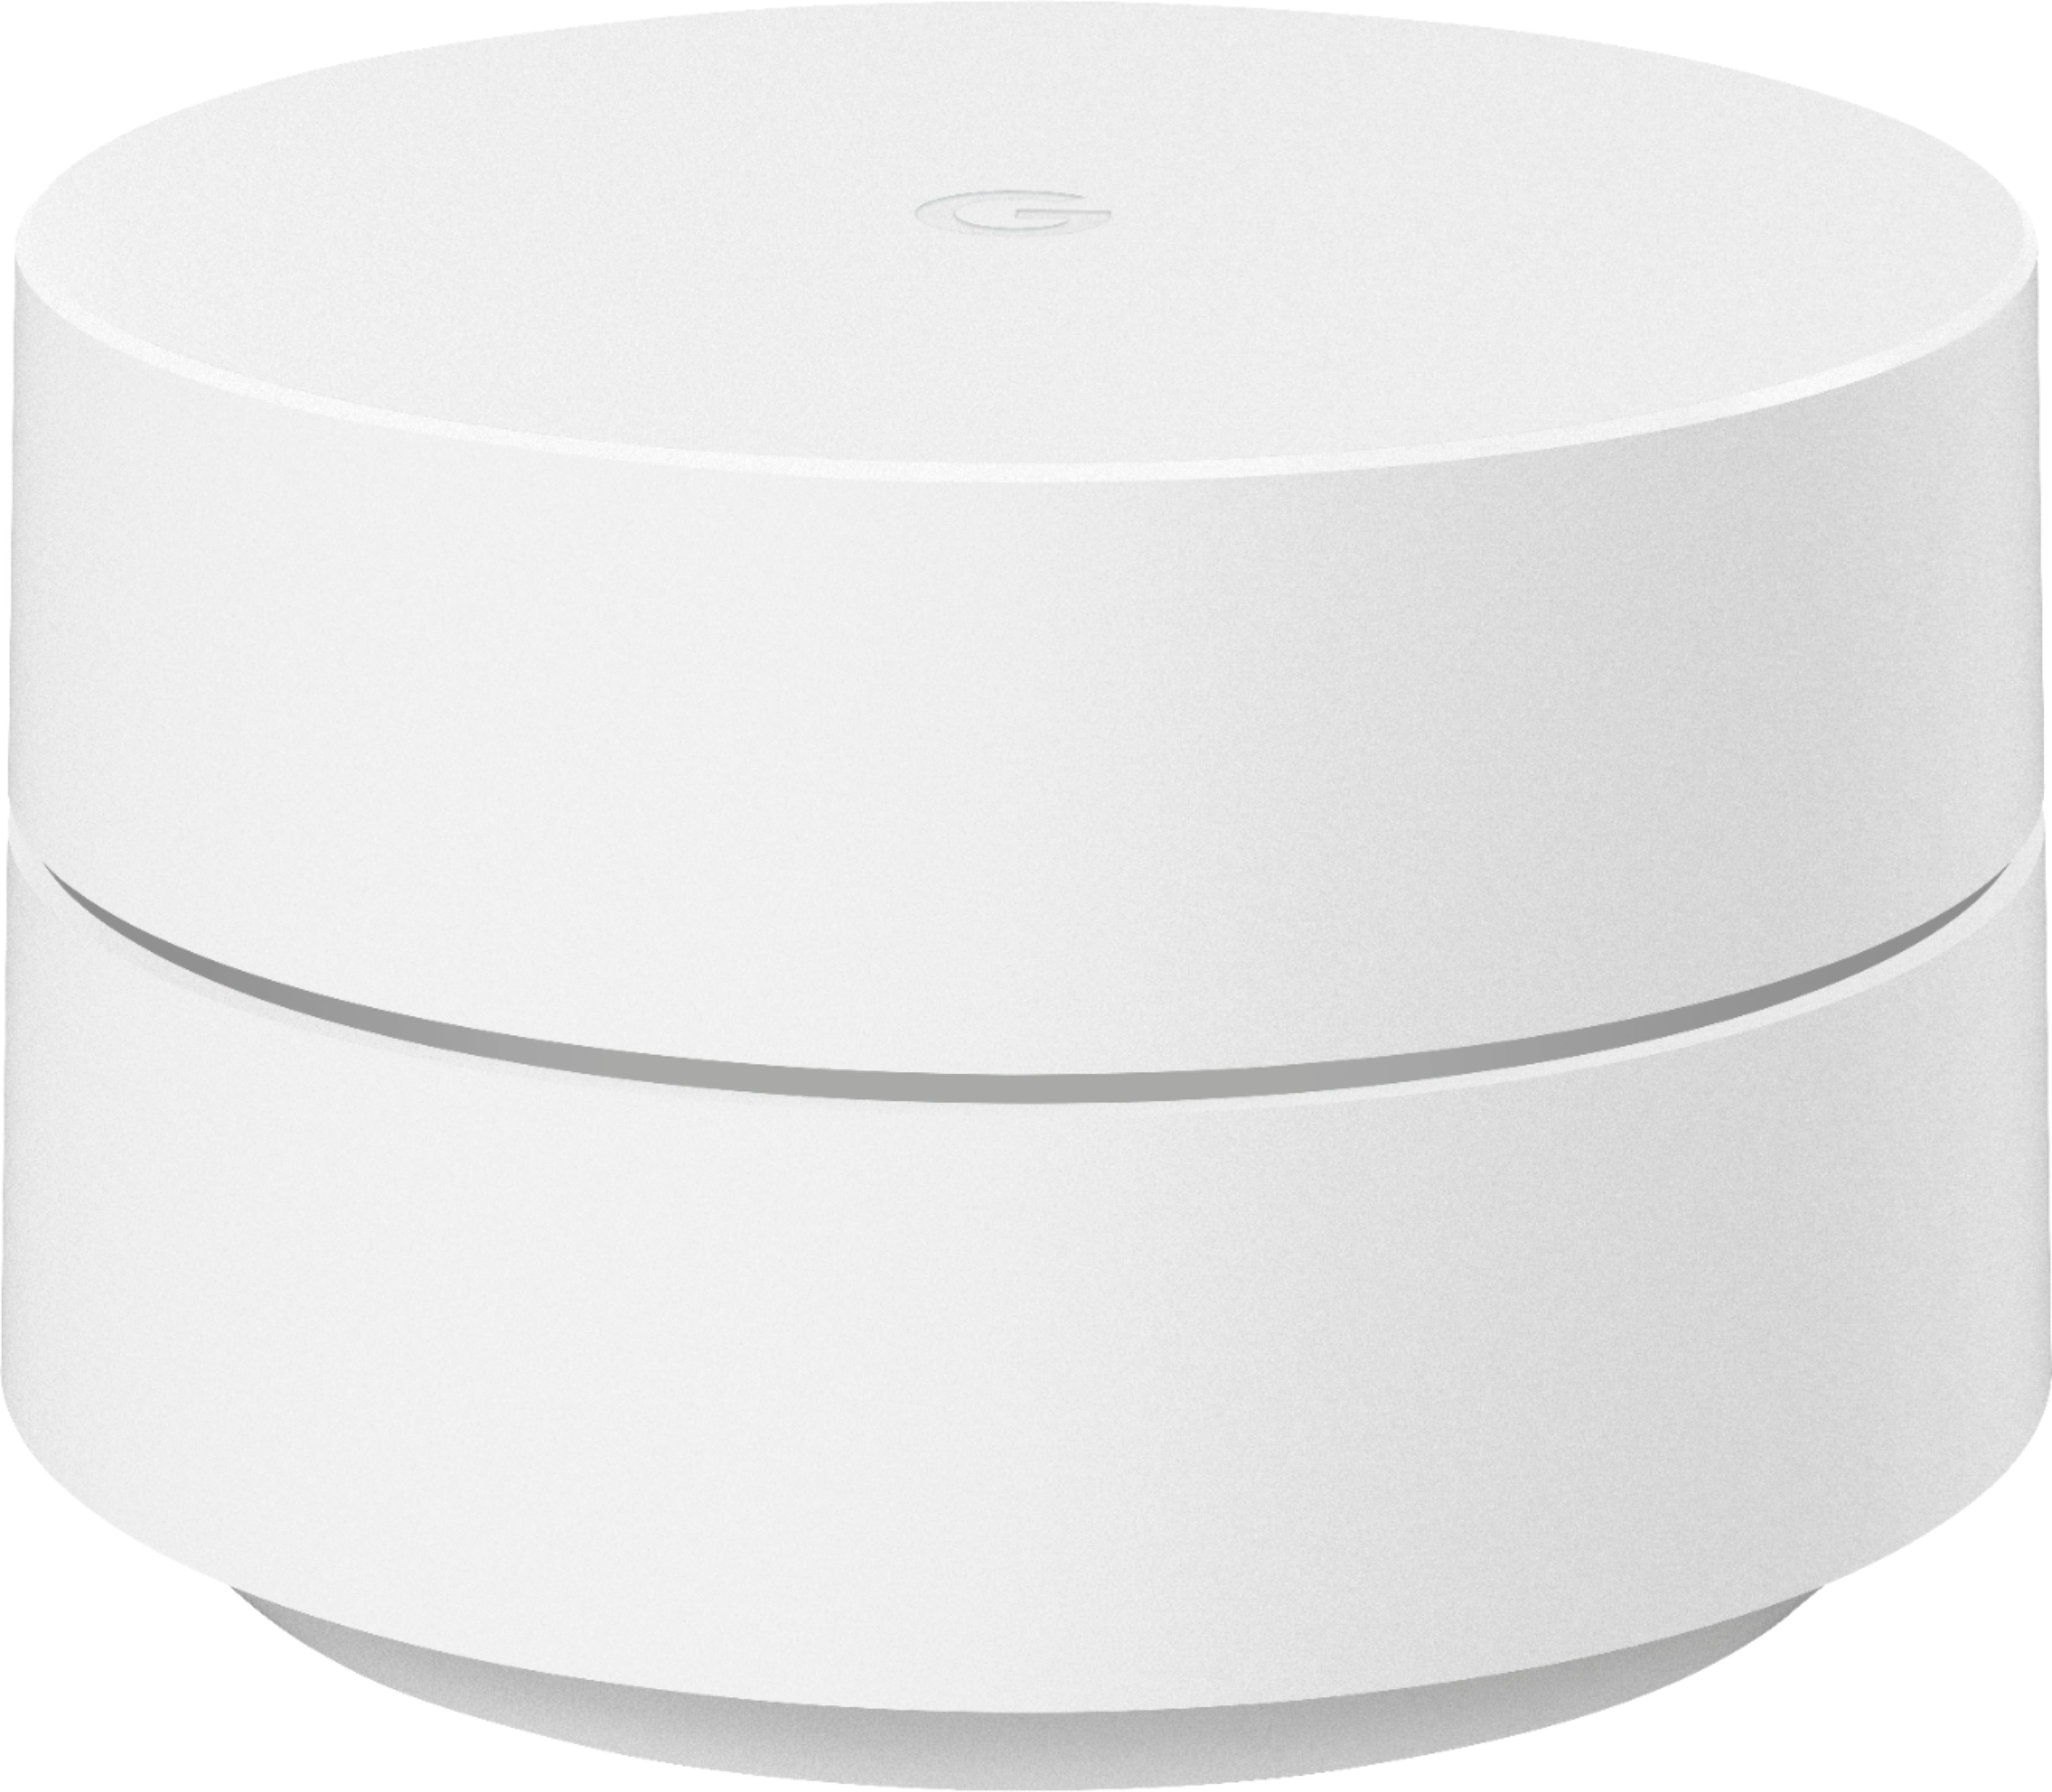 Left View: Google - Wifi - Mesh Router (AC1200) - 1 pack - White